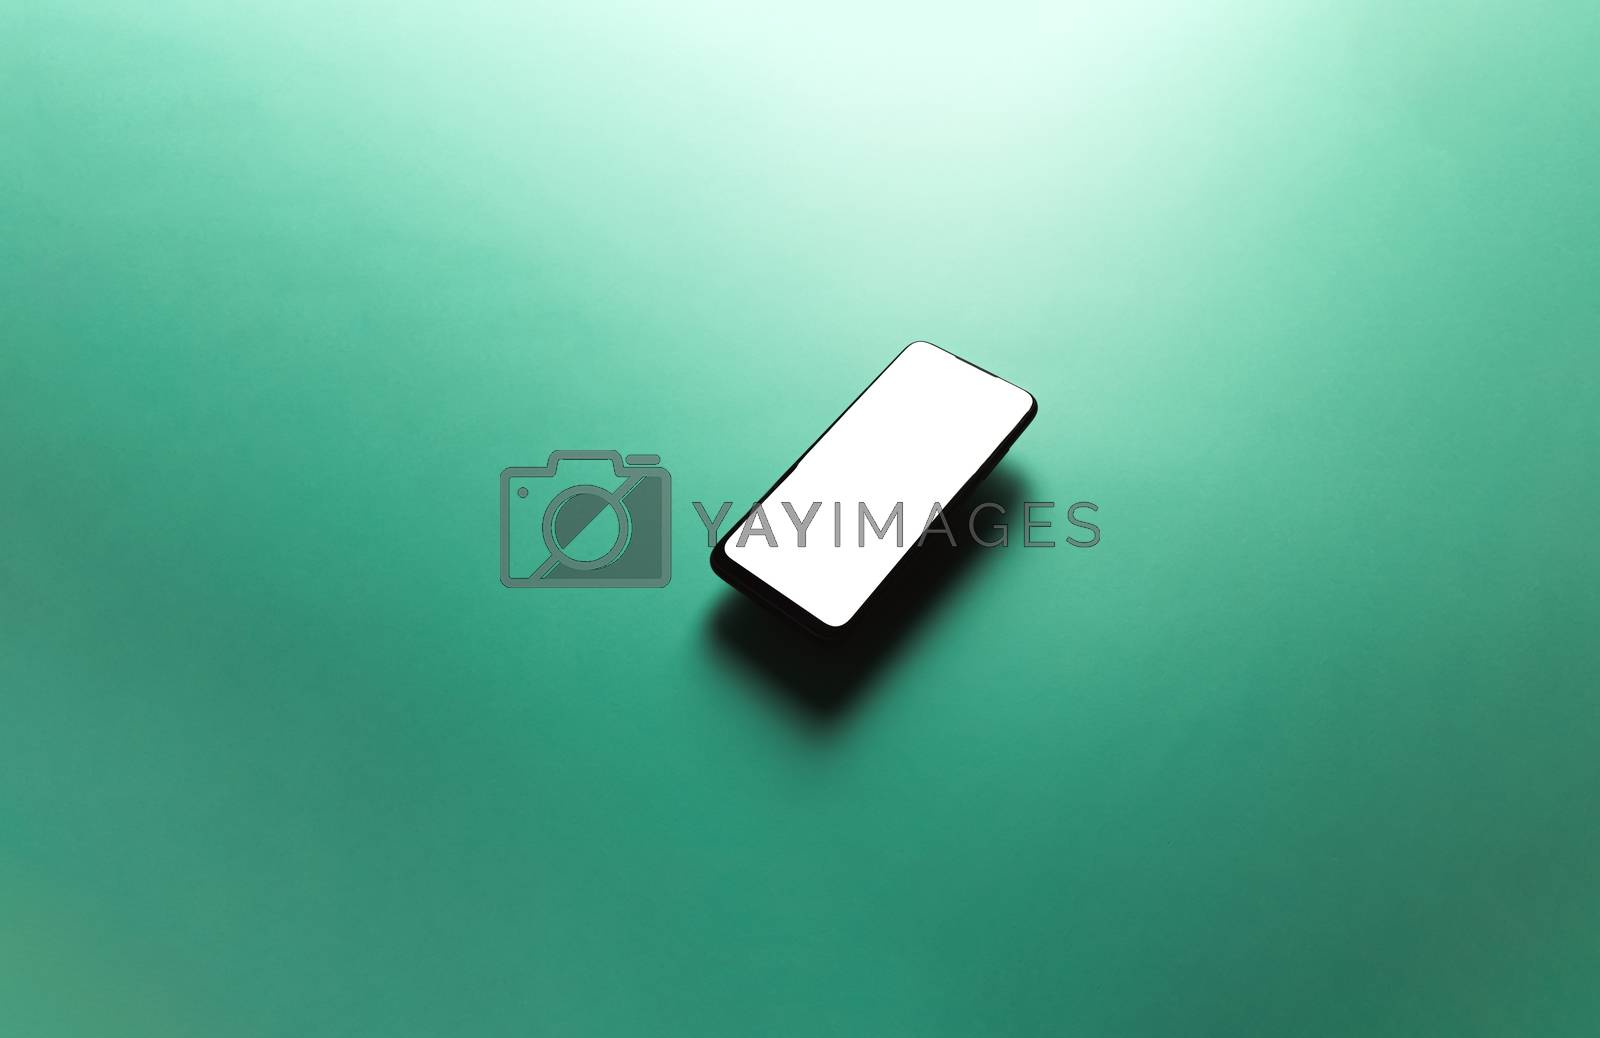 Royalty free image of Minimalistic mock up flat image design with a floating mobile phone with copy space and white scree to write over it over a flat green background by AveCalvar